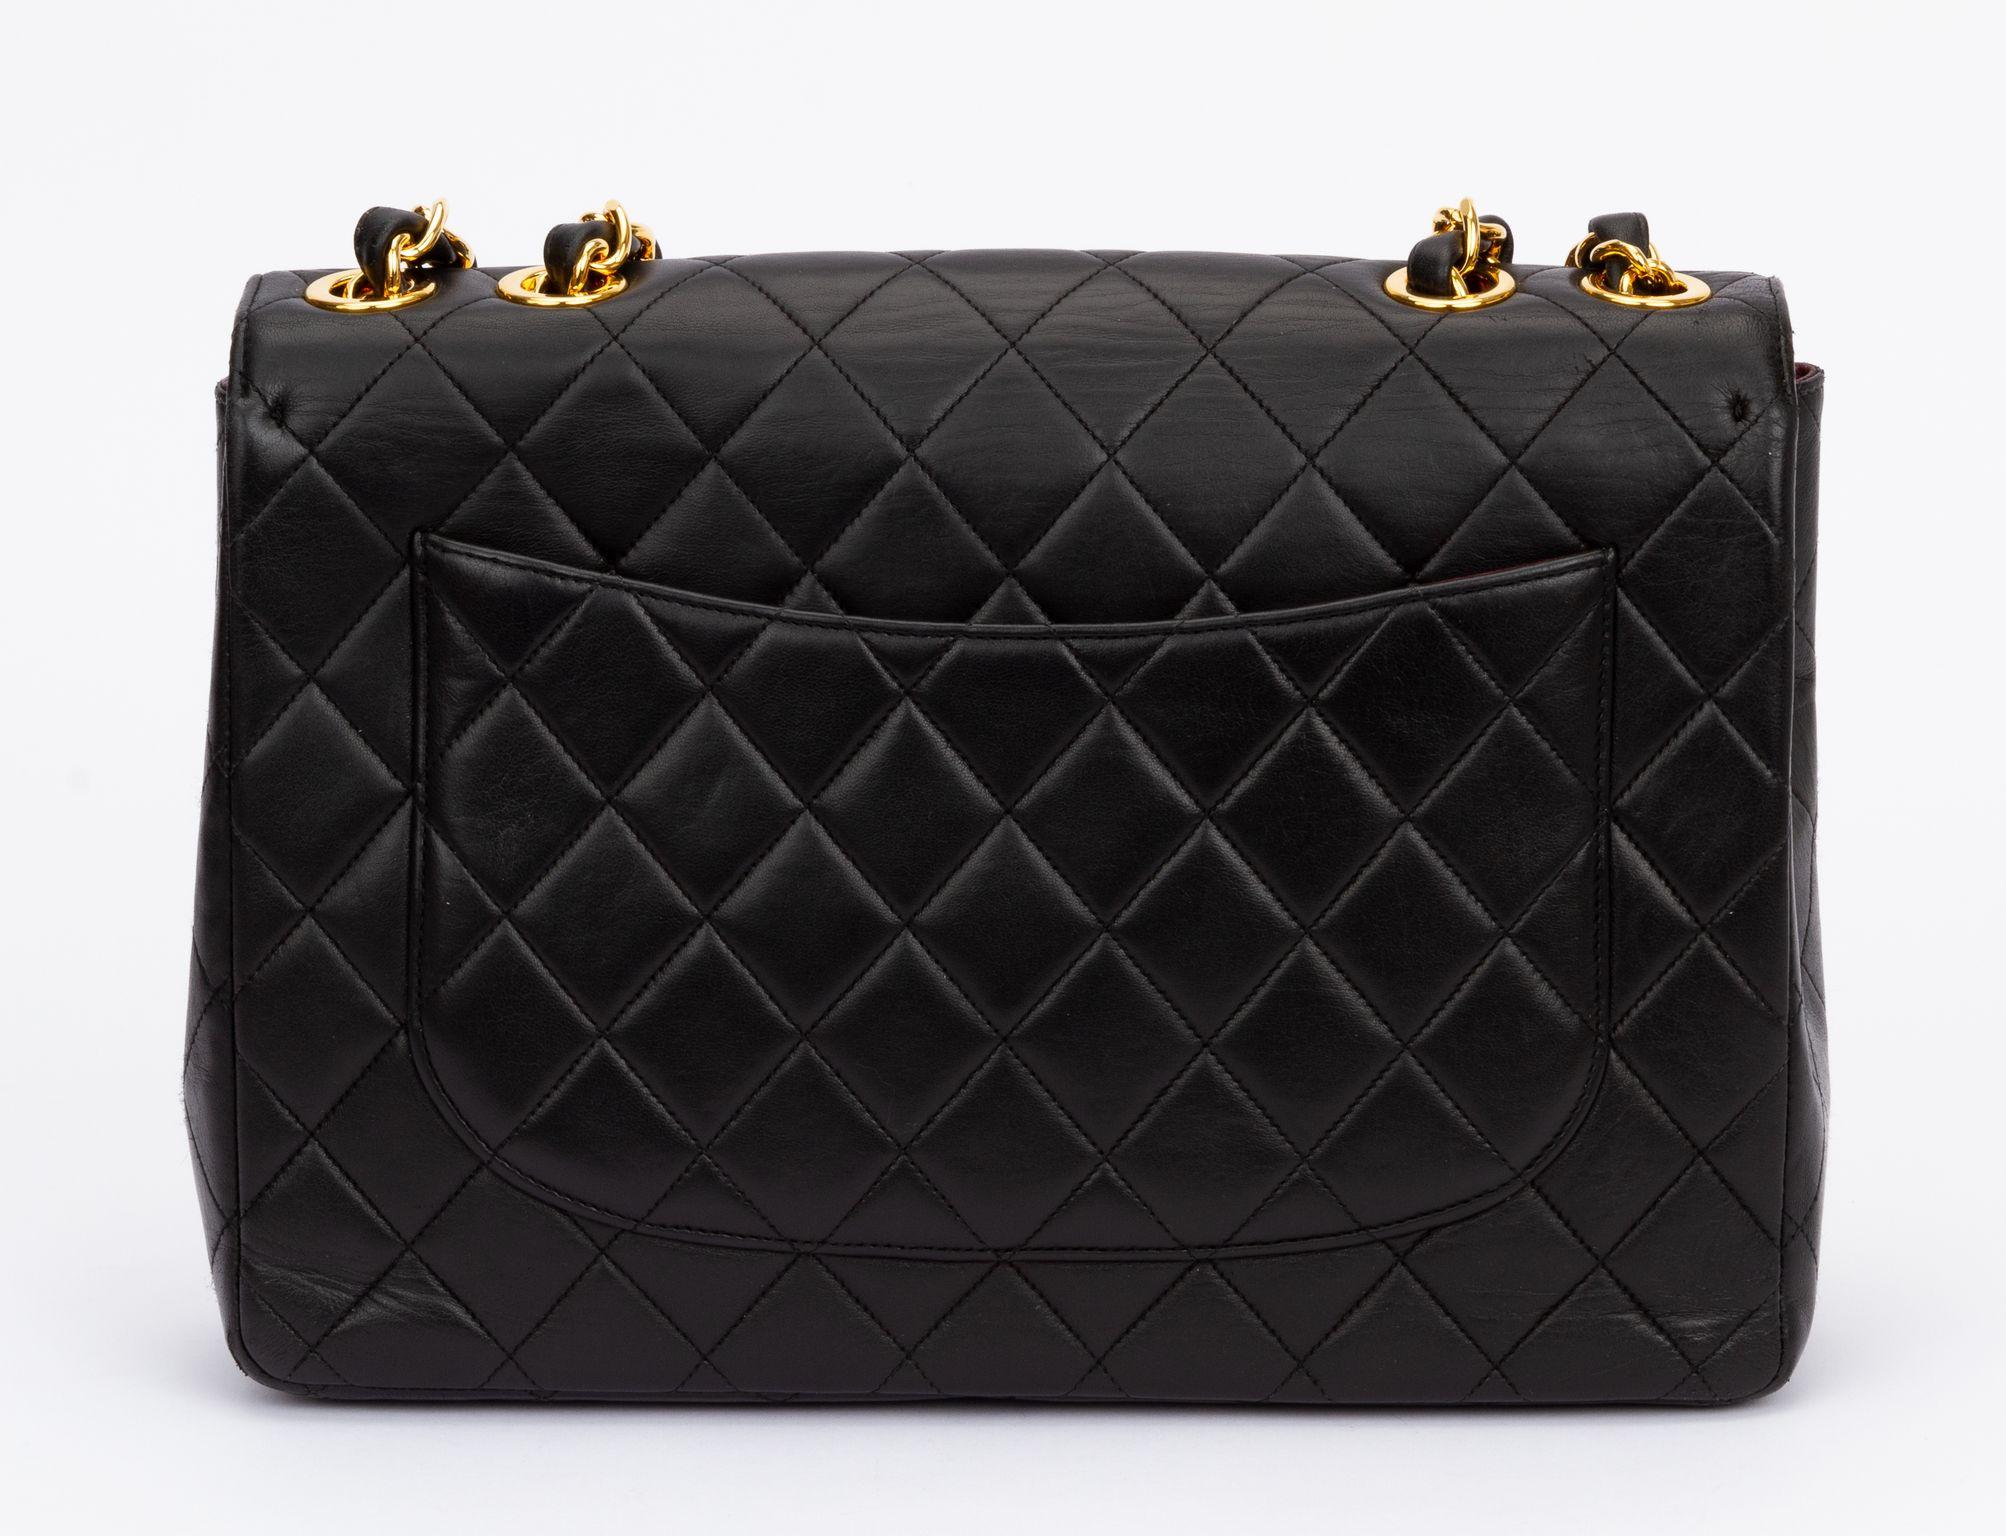 Chanel Jumbo Black 24kt Logo Flap Bag In Excellent Condition For Sale In West Hollywood, CA